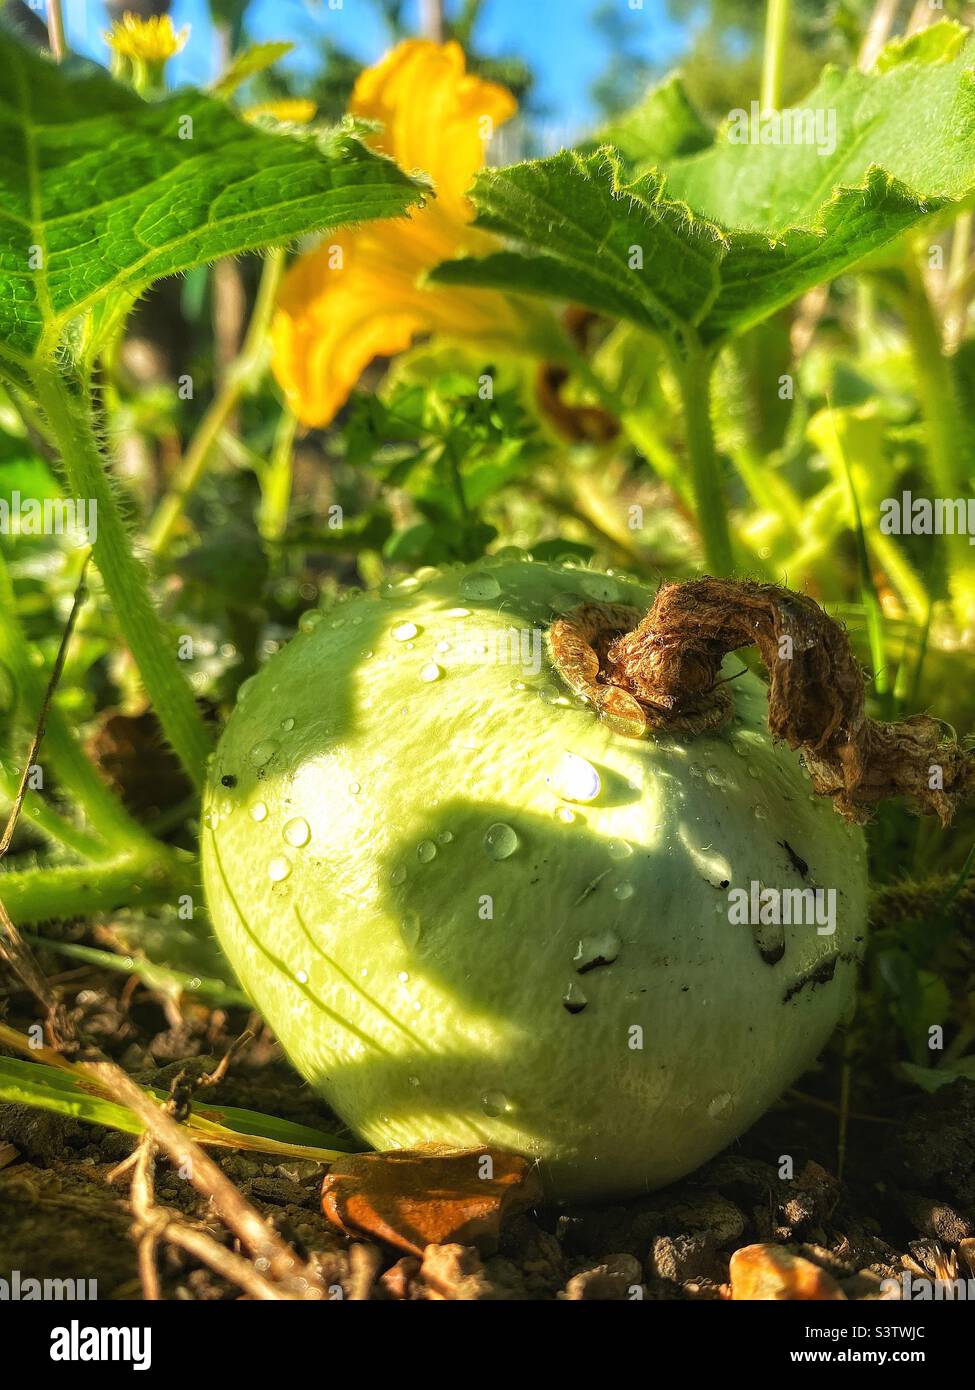 Round courgette and flower. Stock Photo